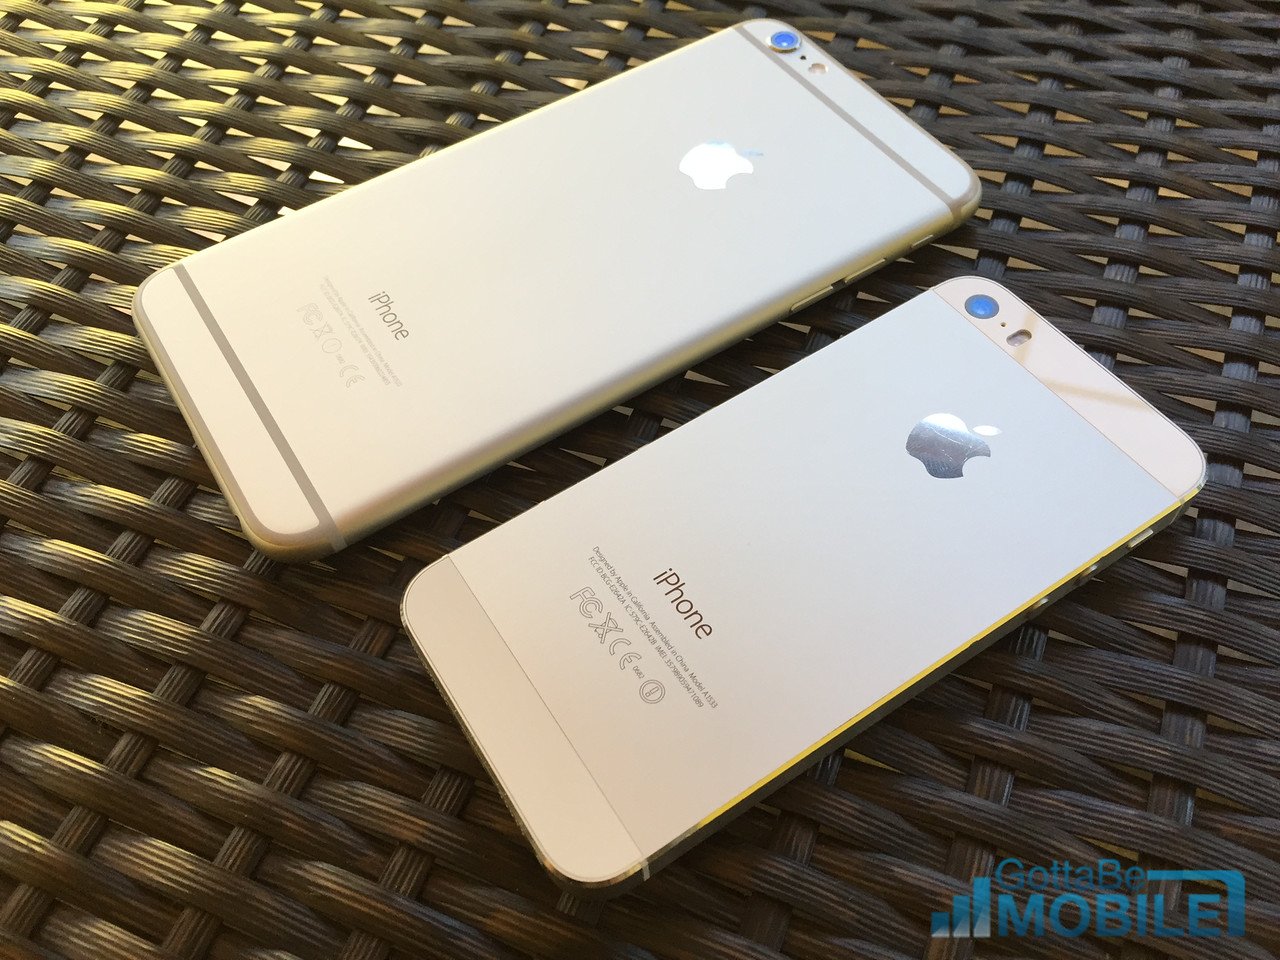 Here's what buyers need to know about the iPhone 6 Plus and the iPhone 5s.